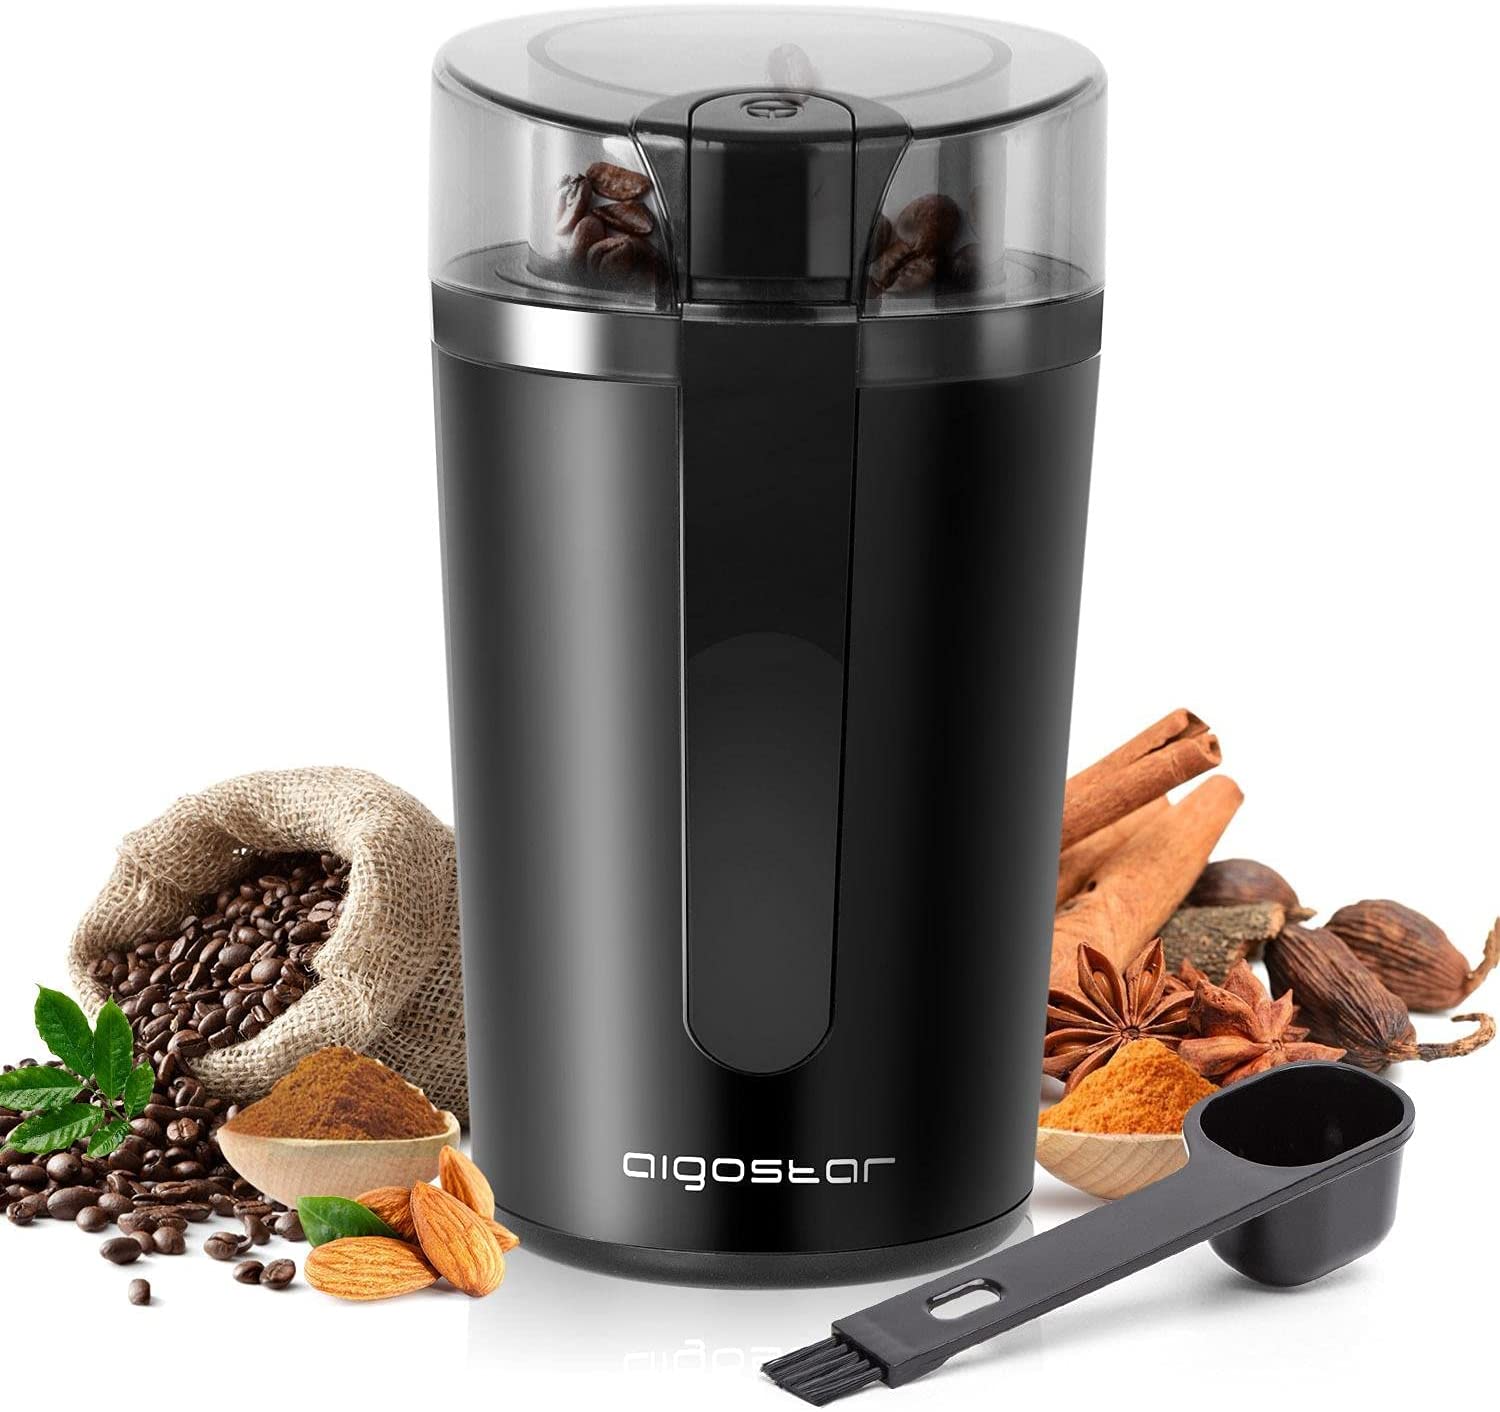 Aigostar Electric Coffee Grinder, Adjustable BPA Free Coffee Grinder / Blender, Grinder for Coffee Beans, Flaxseeds, Nuts, Spices, Grains, 60g, 200W